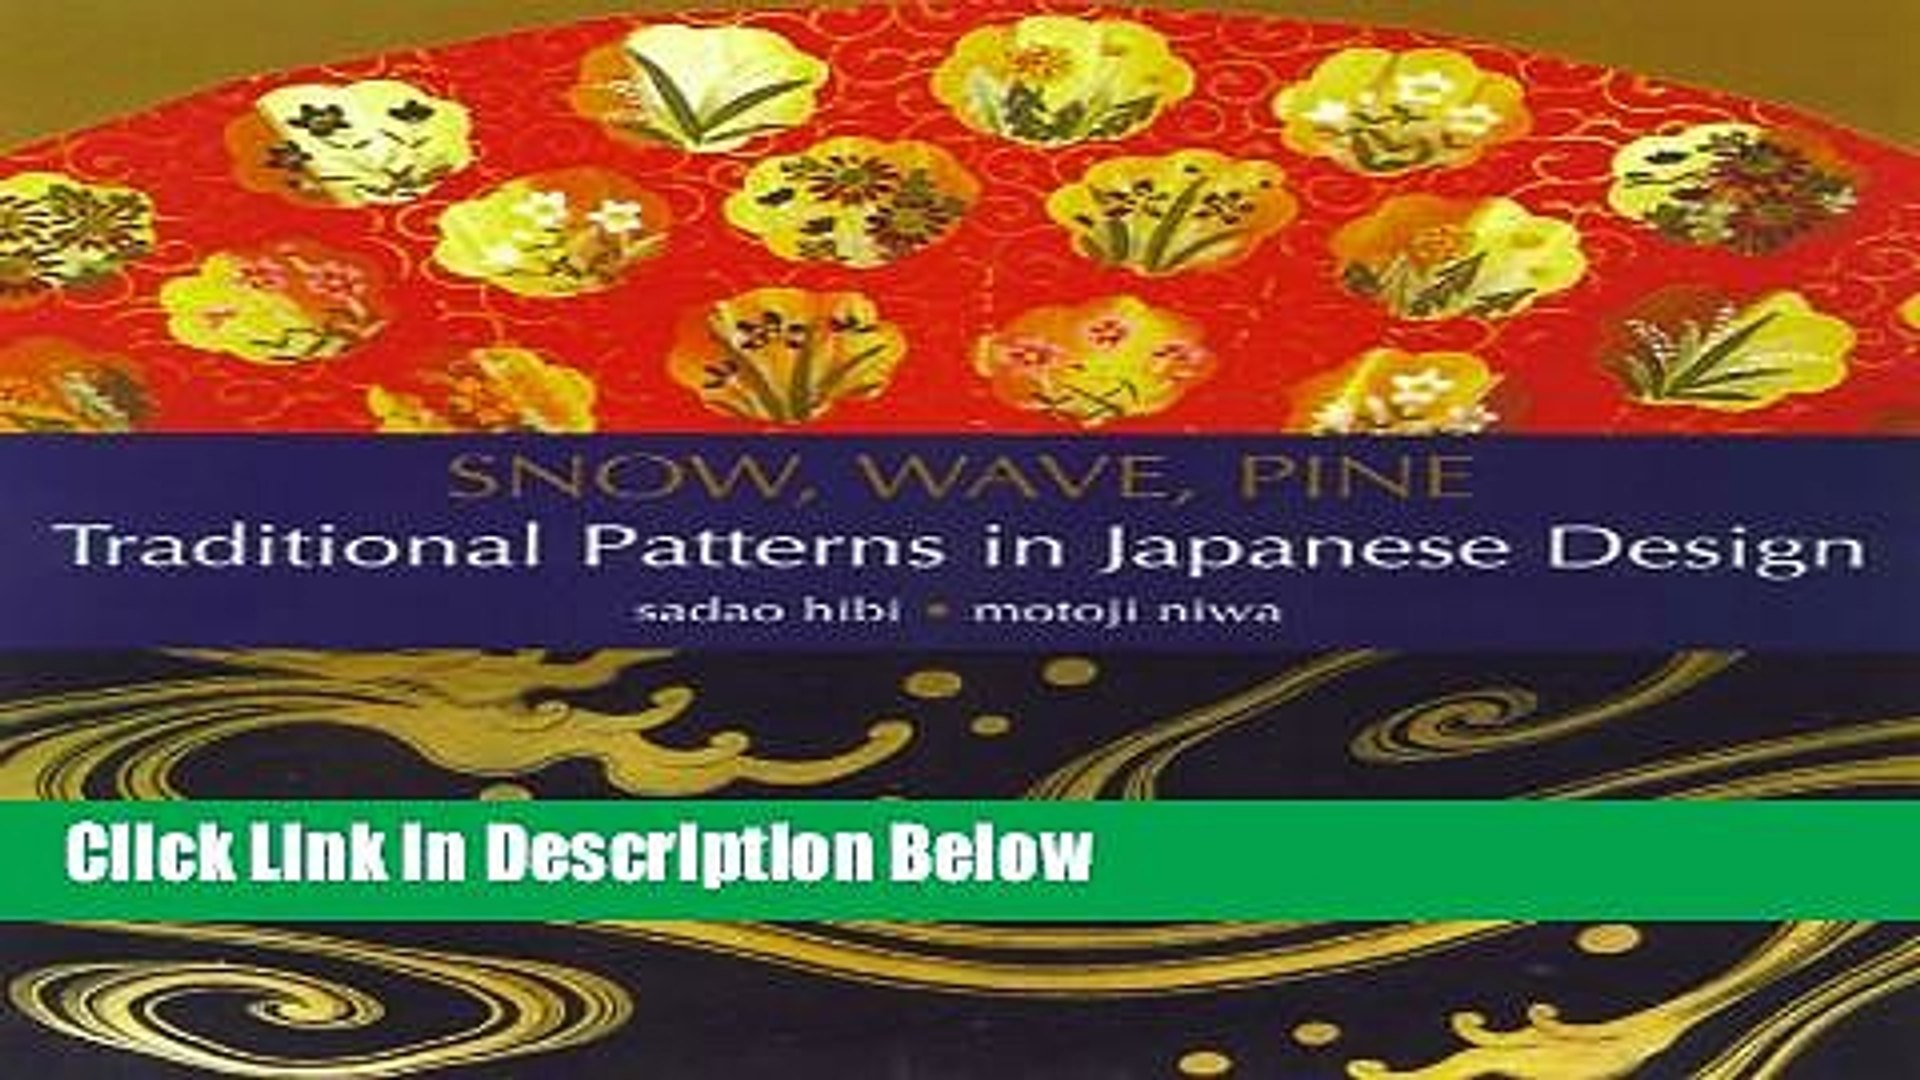 Books Snow, Wave, Pine: Traditional Patterns in Japanese Design Free Online